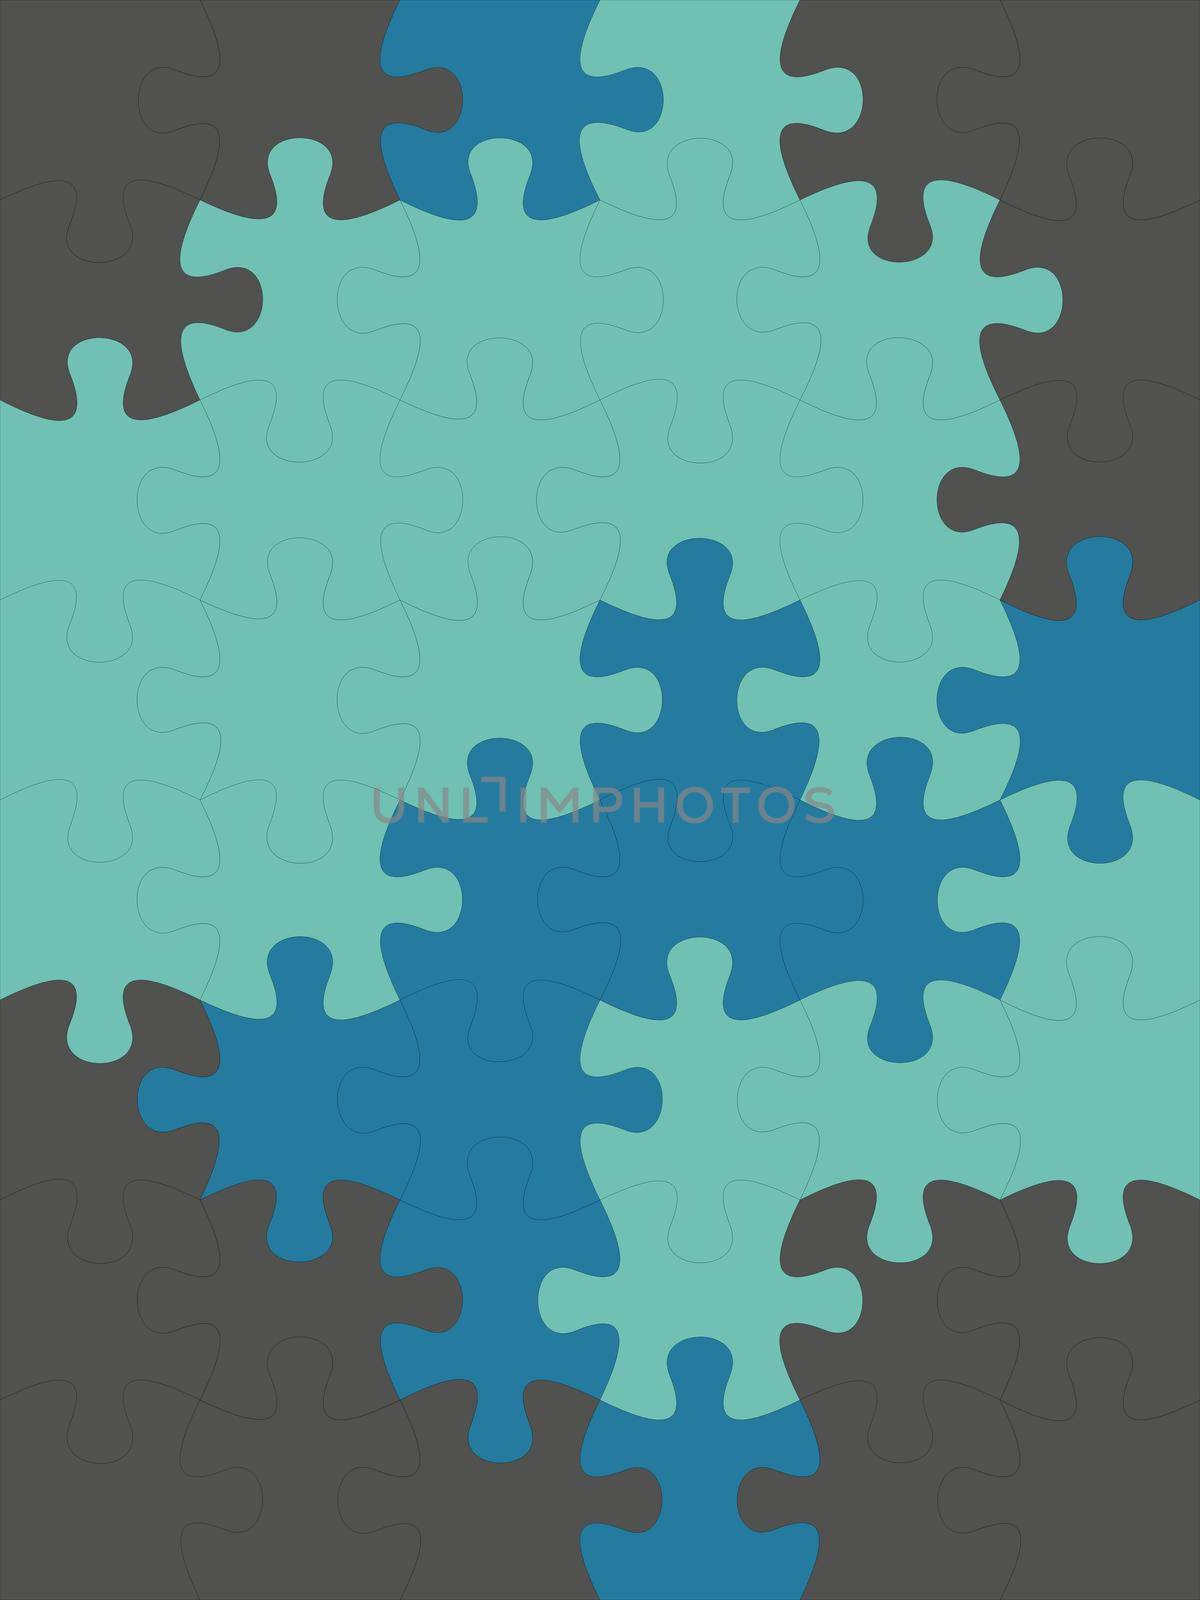 Different shades of blue color jigsaw puzzles designs on solid sheet of wallpaper. Concept of home decor and interior designing by tabishere